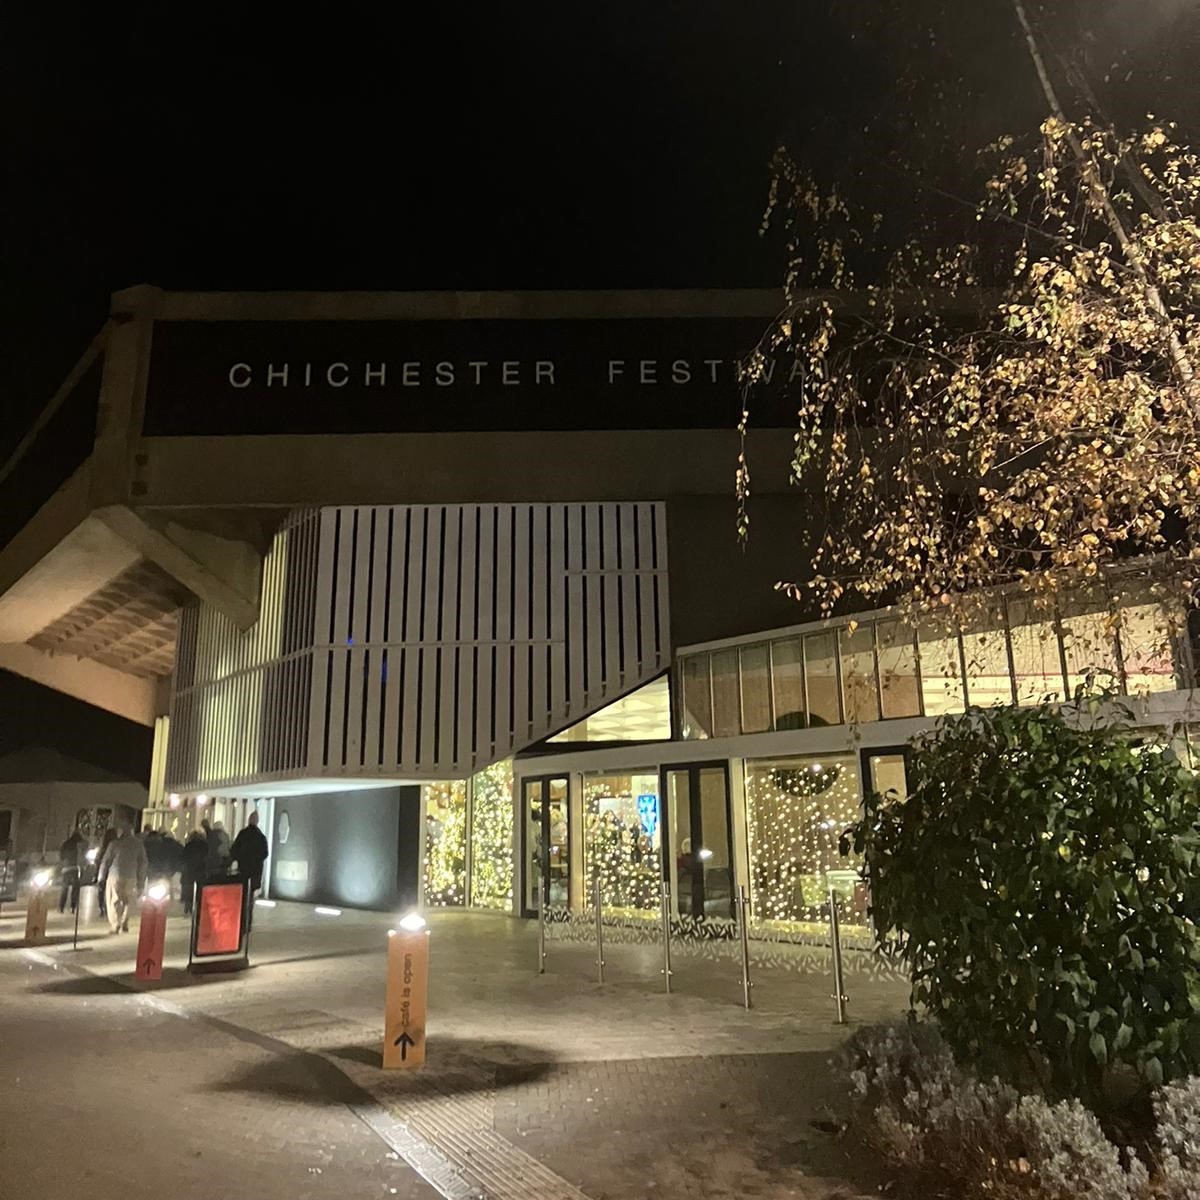 Outside of Chichester Festival Theatre at night, which has bright Christmas lights